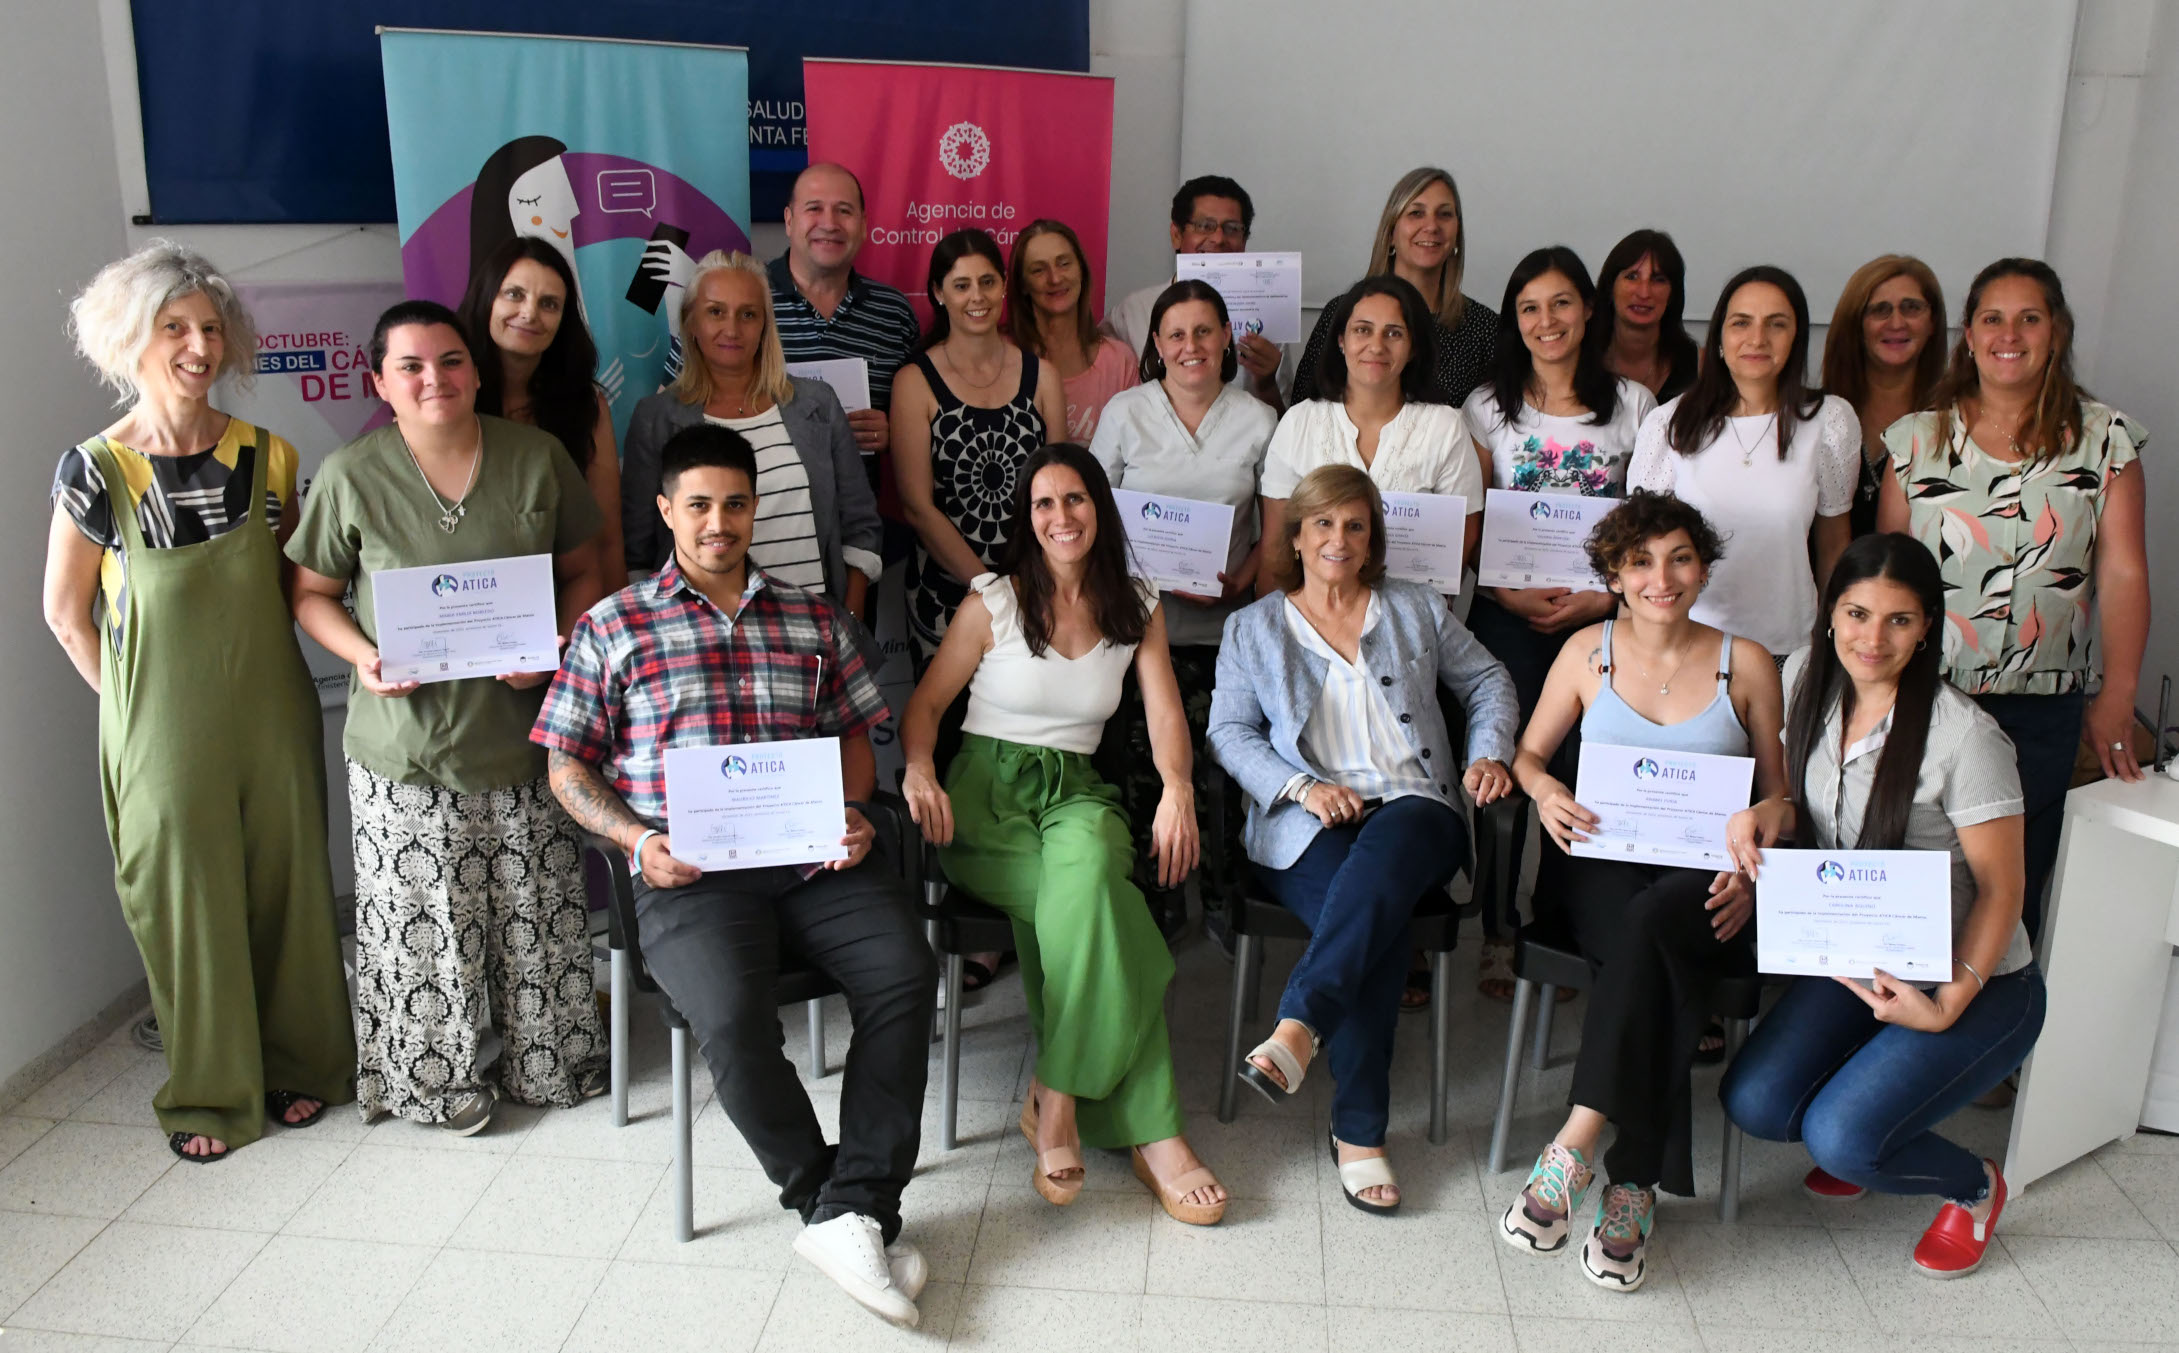 The ATICA Project for breast cancer ended with a meeting in Santa Fe